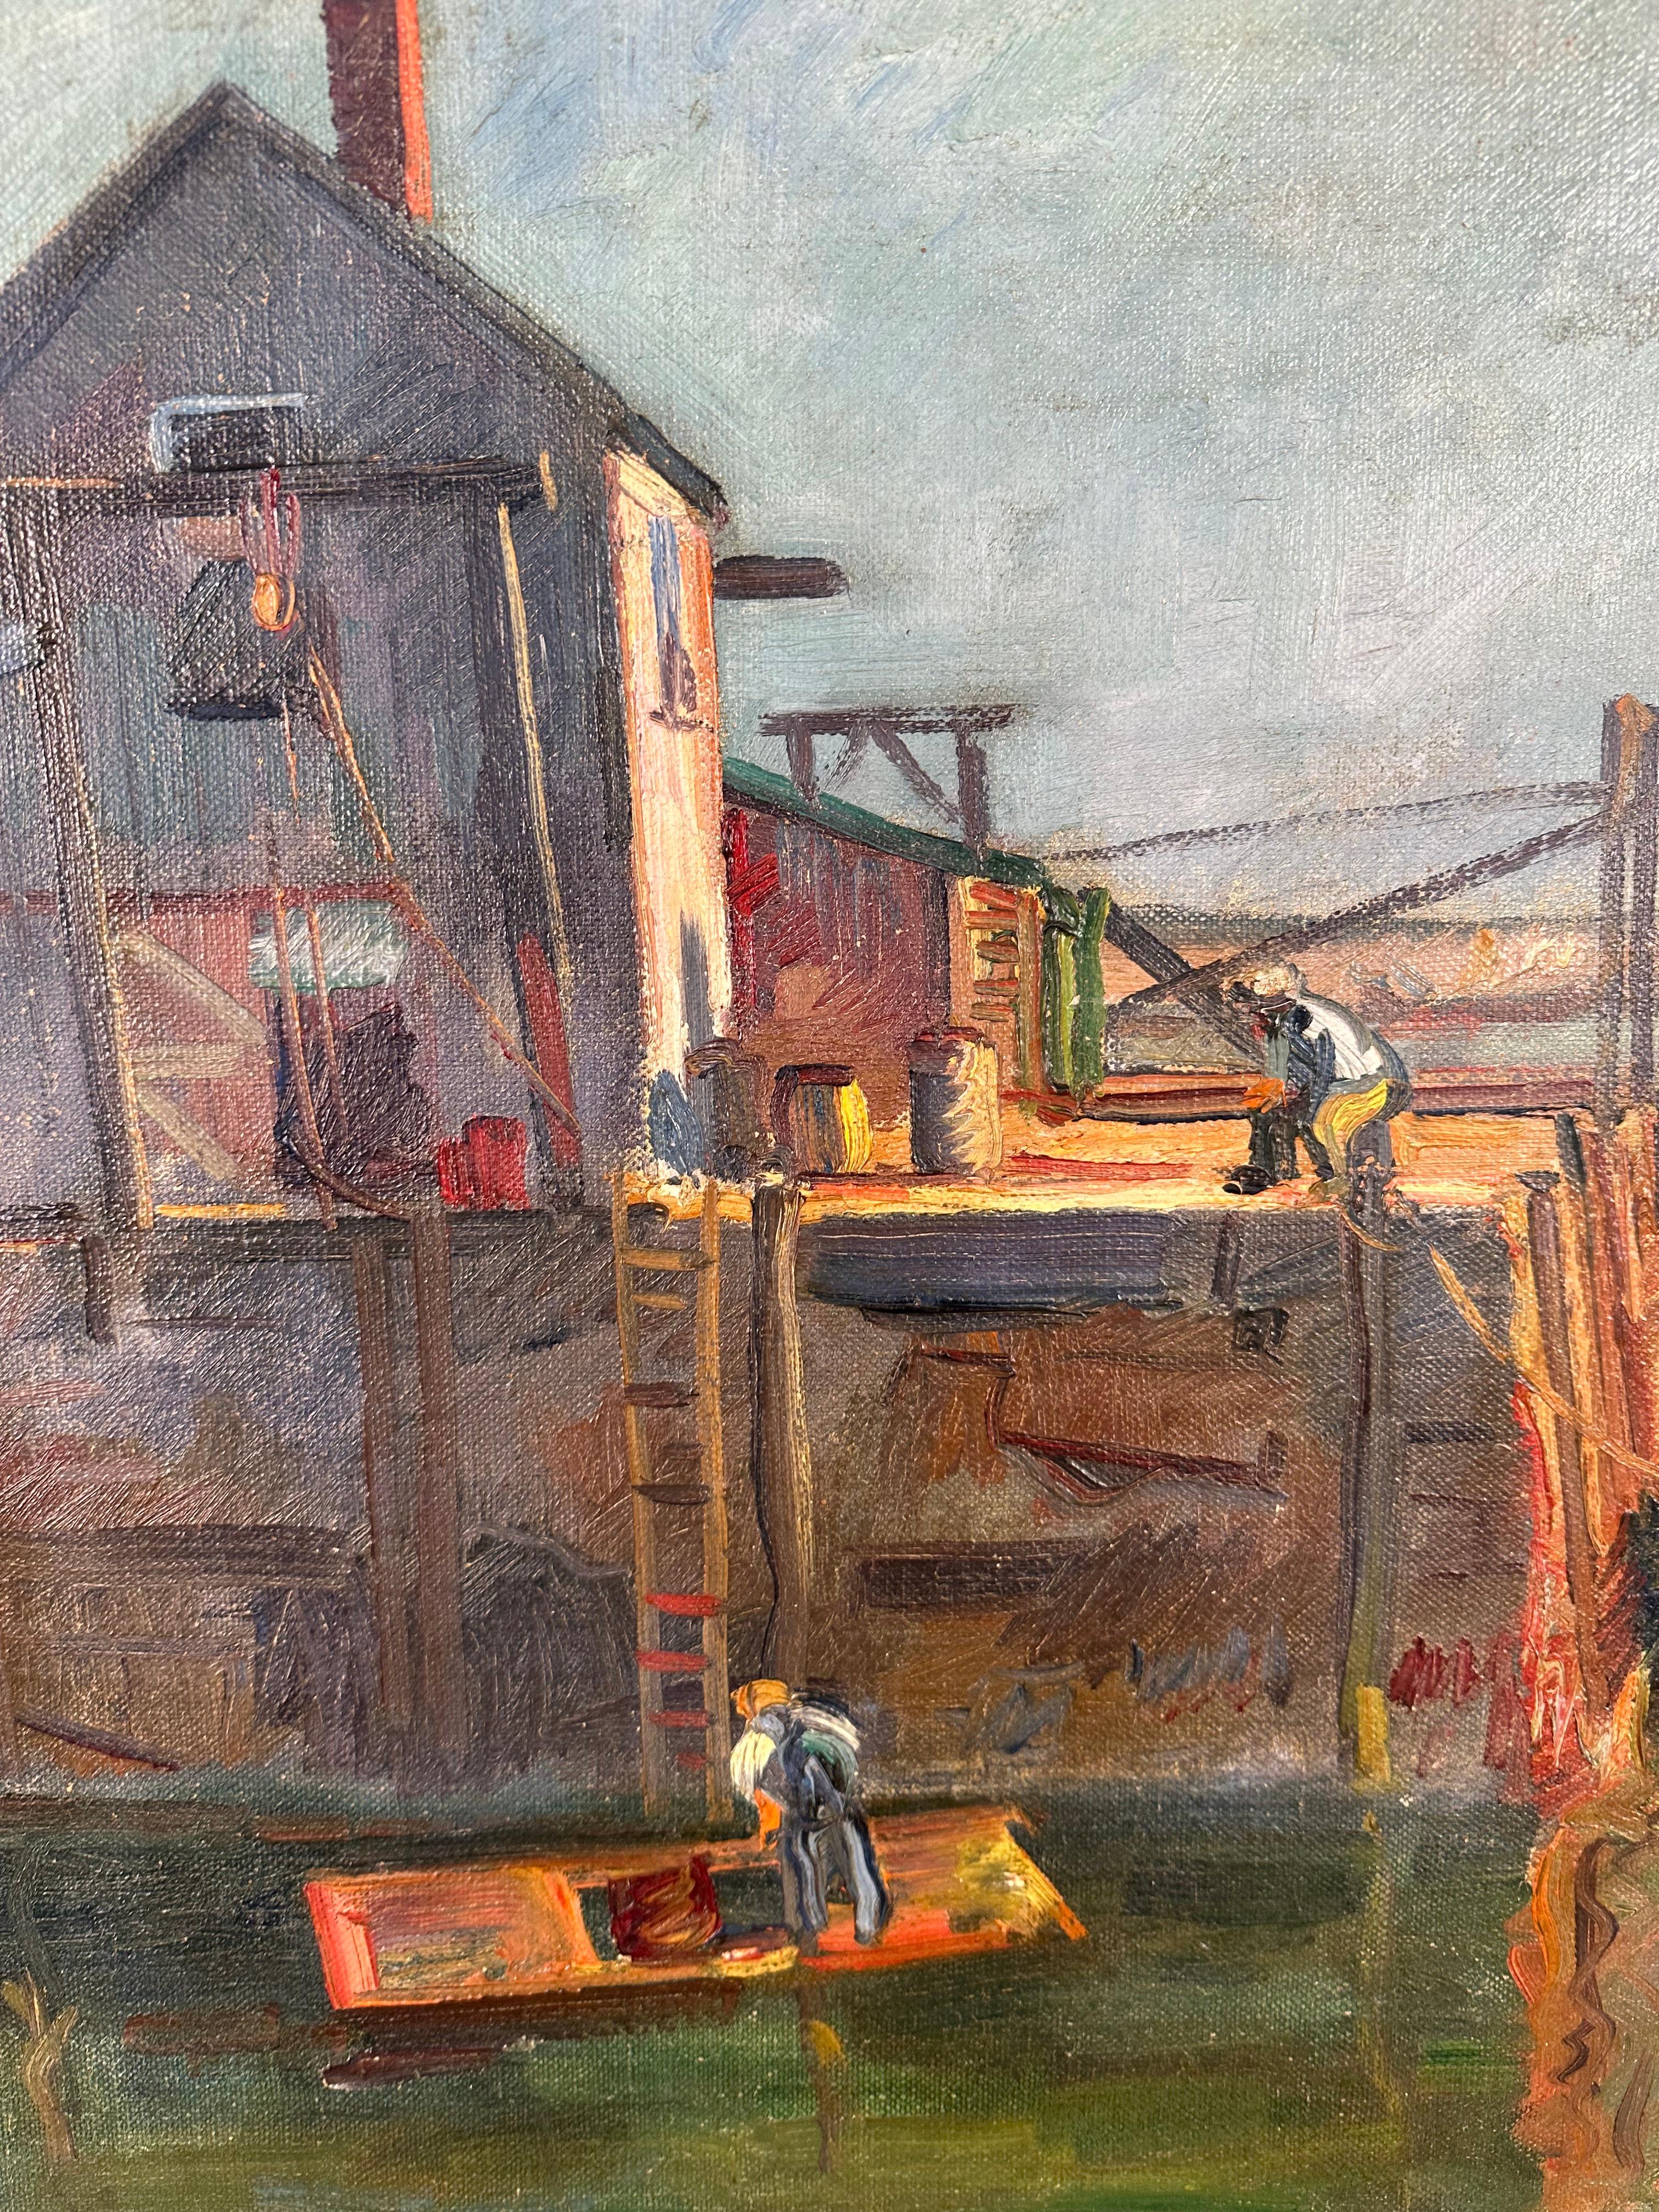 Beautiful 1931 painting by American artist, Giovanni Martino (1908-1997). Oil on canvas measures 25 x 30 inches. Measures 35 x 39 inches framed. The scene depicts what is definitively the Rockport, Mass. fishing pier. Excellent condition with a few